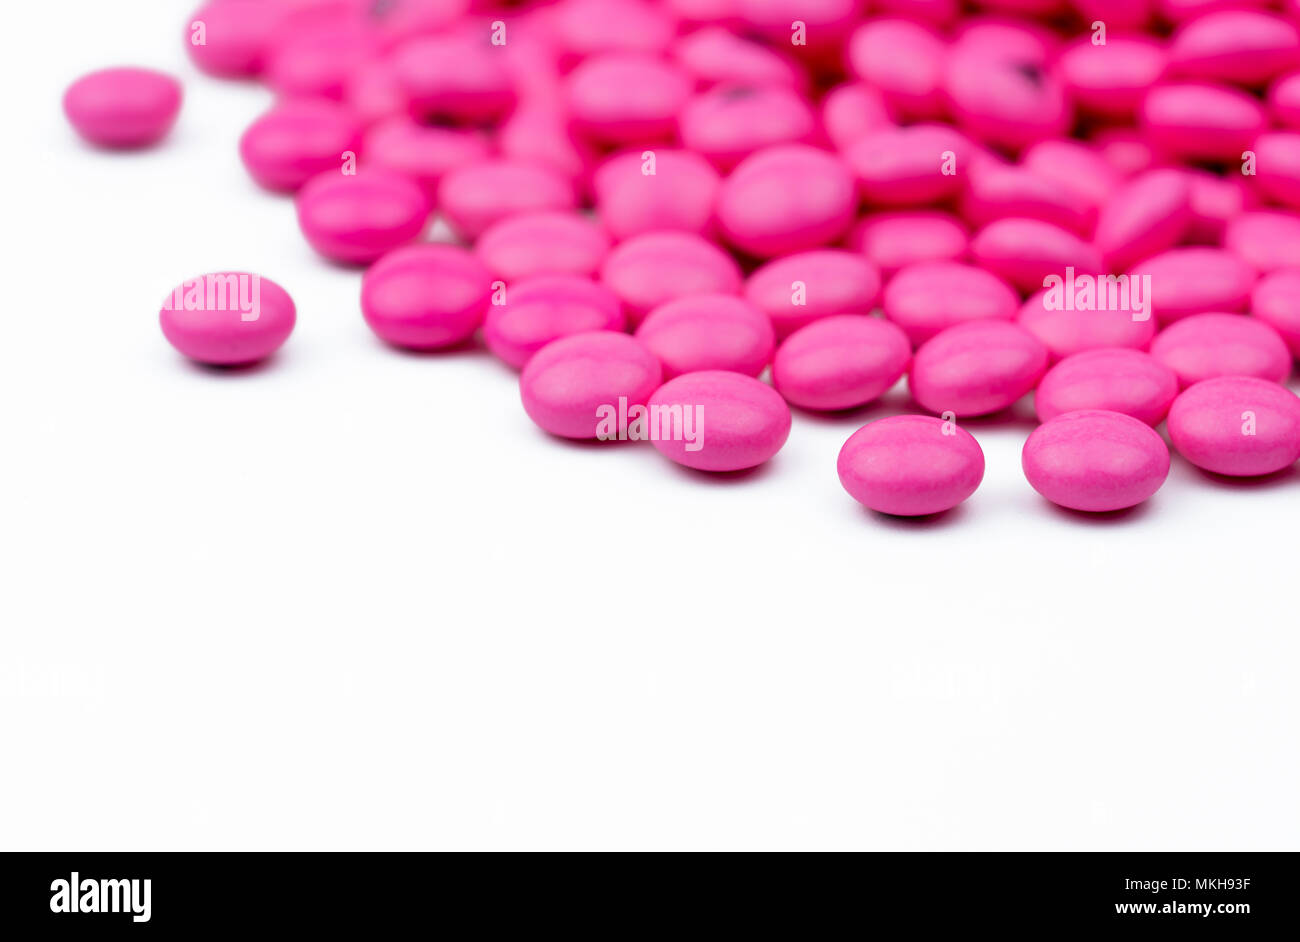 Closeup pile of pink round sugar coated tablets pills isolated on white background with copy space. Amitriptyline medicine for treatment anti-anxiety, Stock Photo